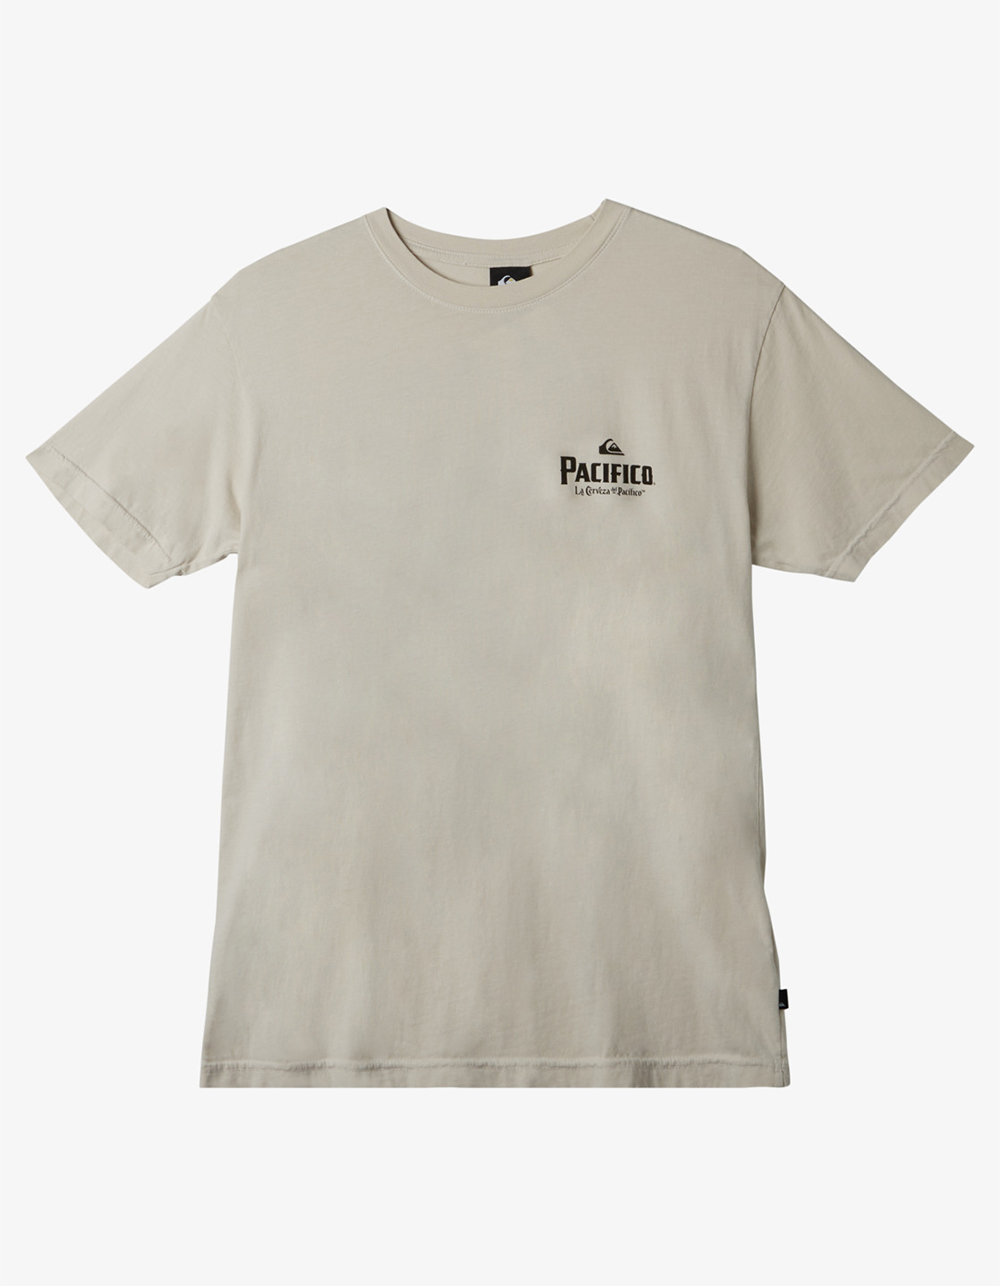 QUIKSILVER x Pacifico Don't Fight The Foam Mens Tee